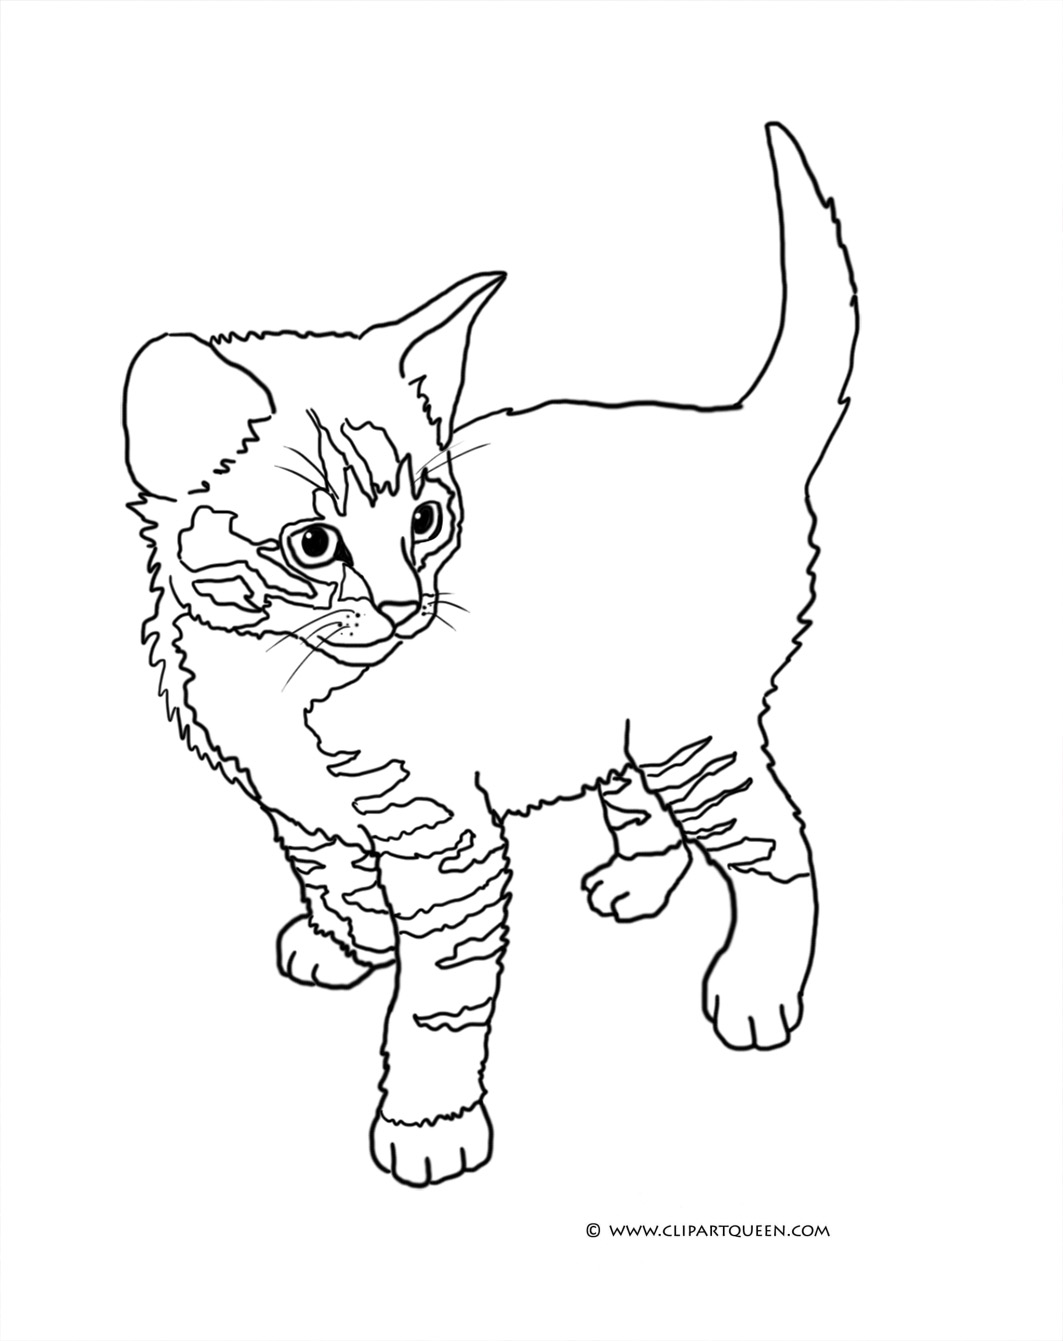 coloring pictures of cats the mother cat and her kittens coloring pages hellokidscom pictures coloring of cats 